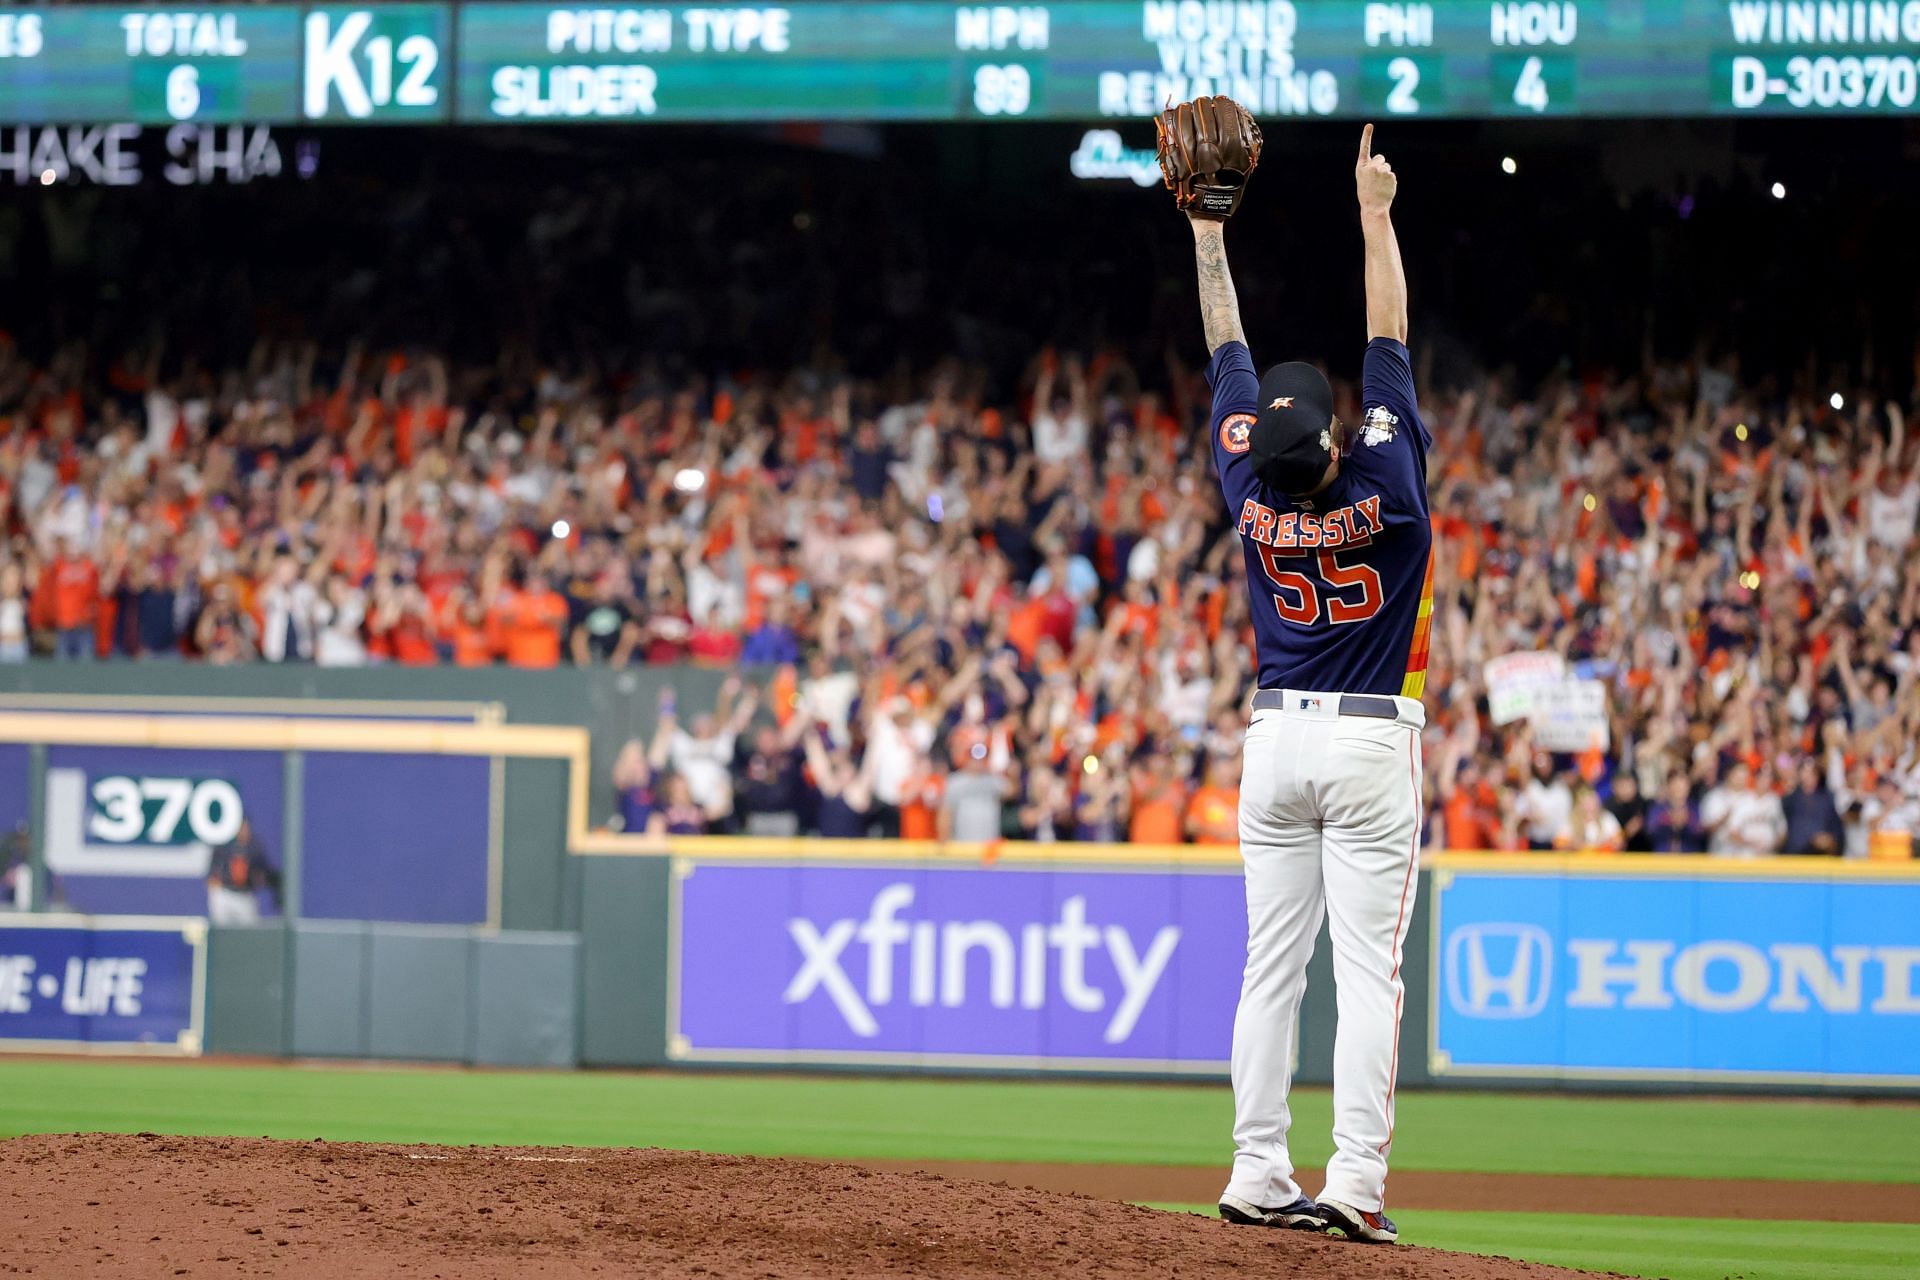 World Series 2022: Houston Astros win first title-clinching home game among  the major sports in the city of Houston since 1995